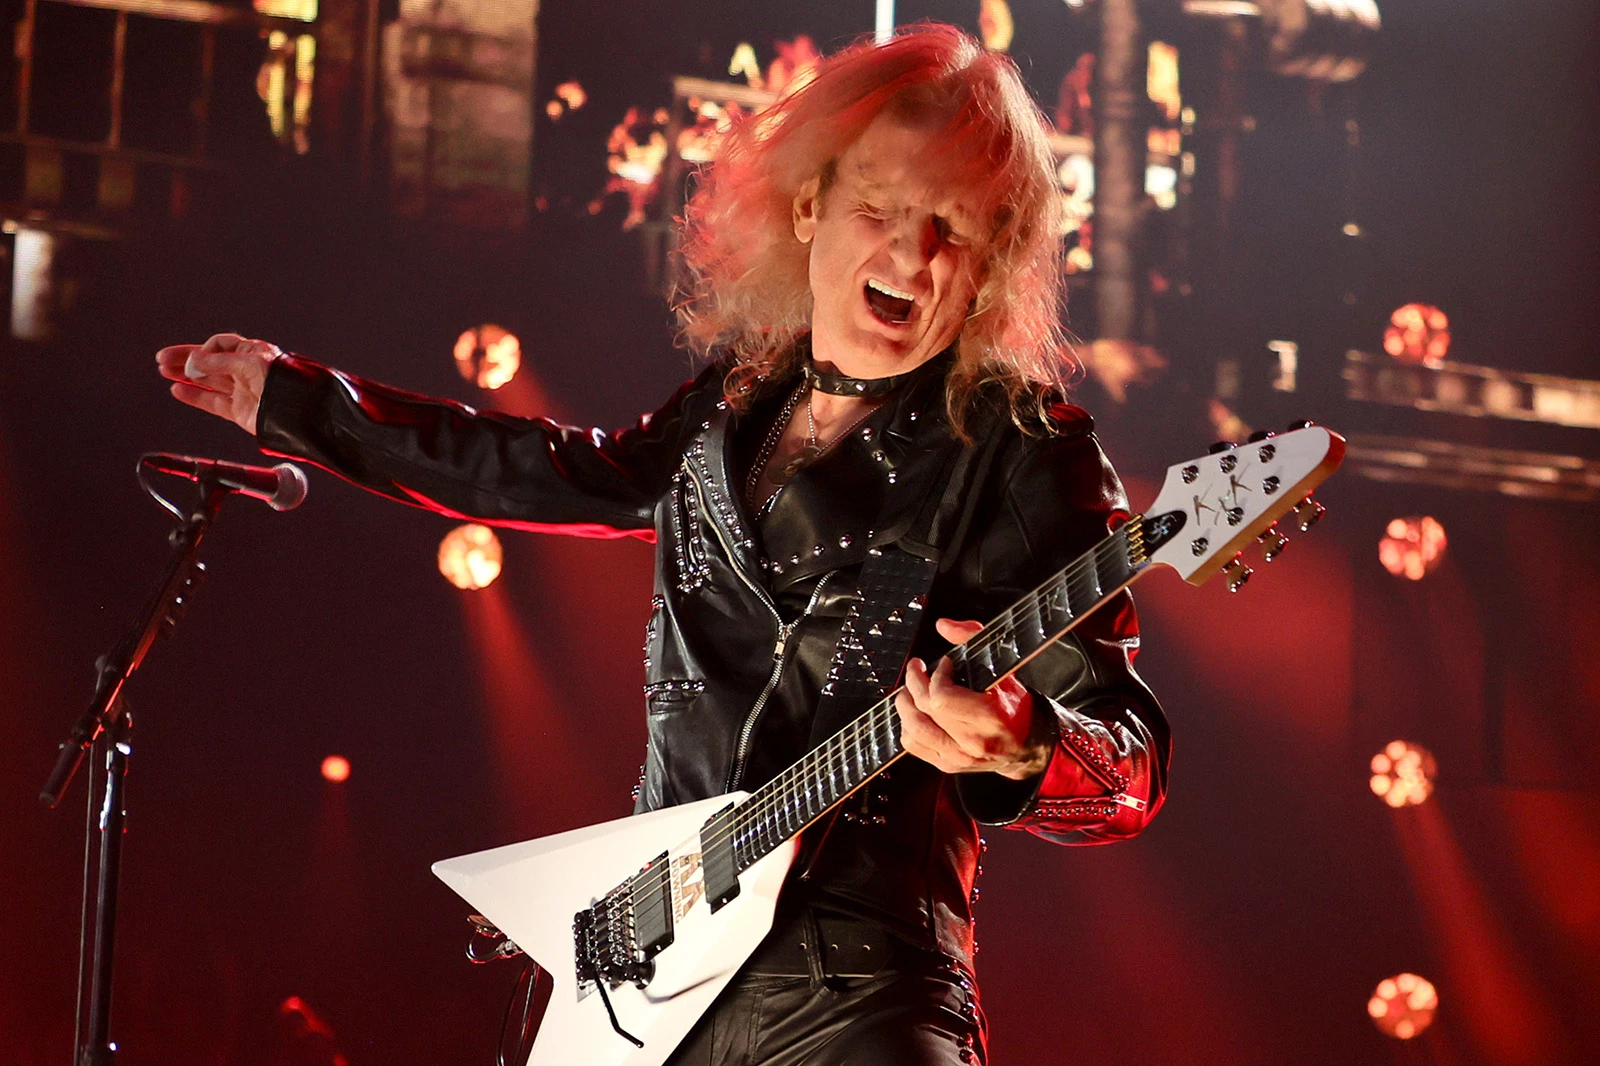 Judas Priest Manager Says K.K. Downing Missed Chance to Reconnect